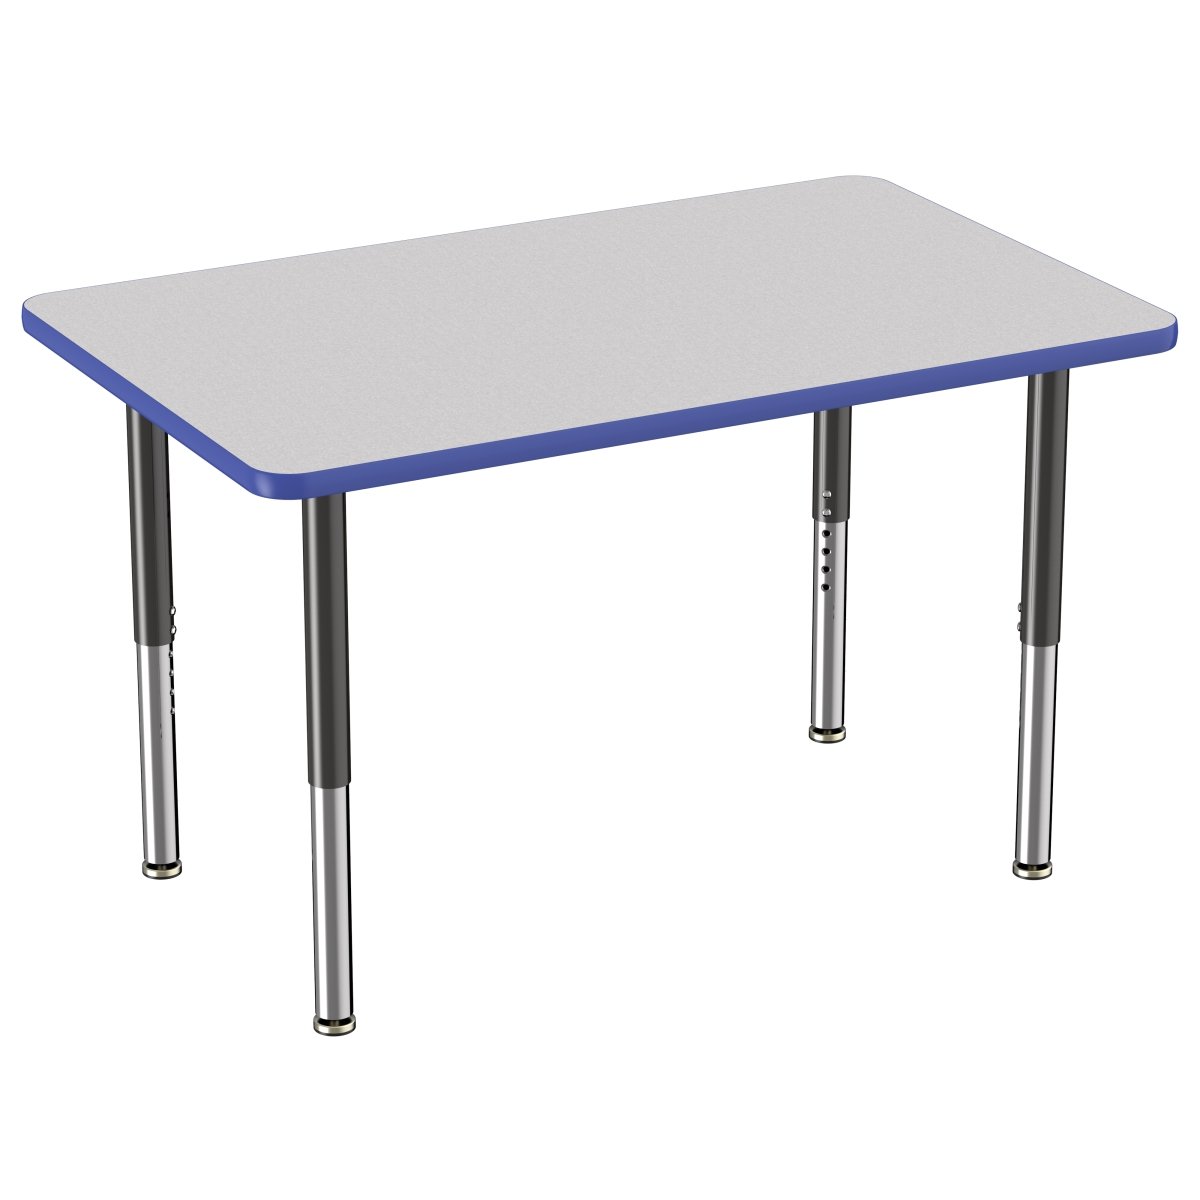 10022-gybl 30 X 48 In. Rectangle T-mold Adjustable Activity Table With Super Leg - Grey & Blue